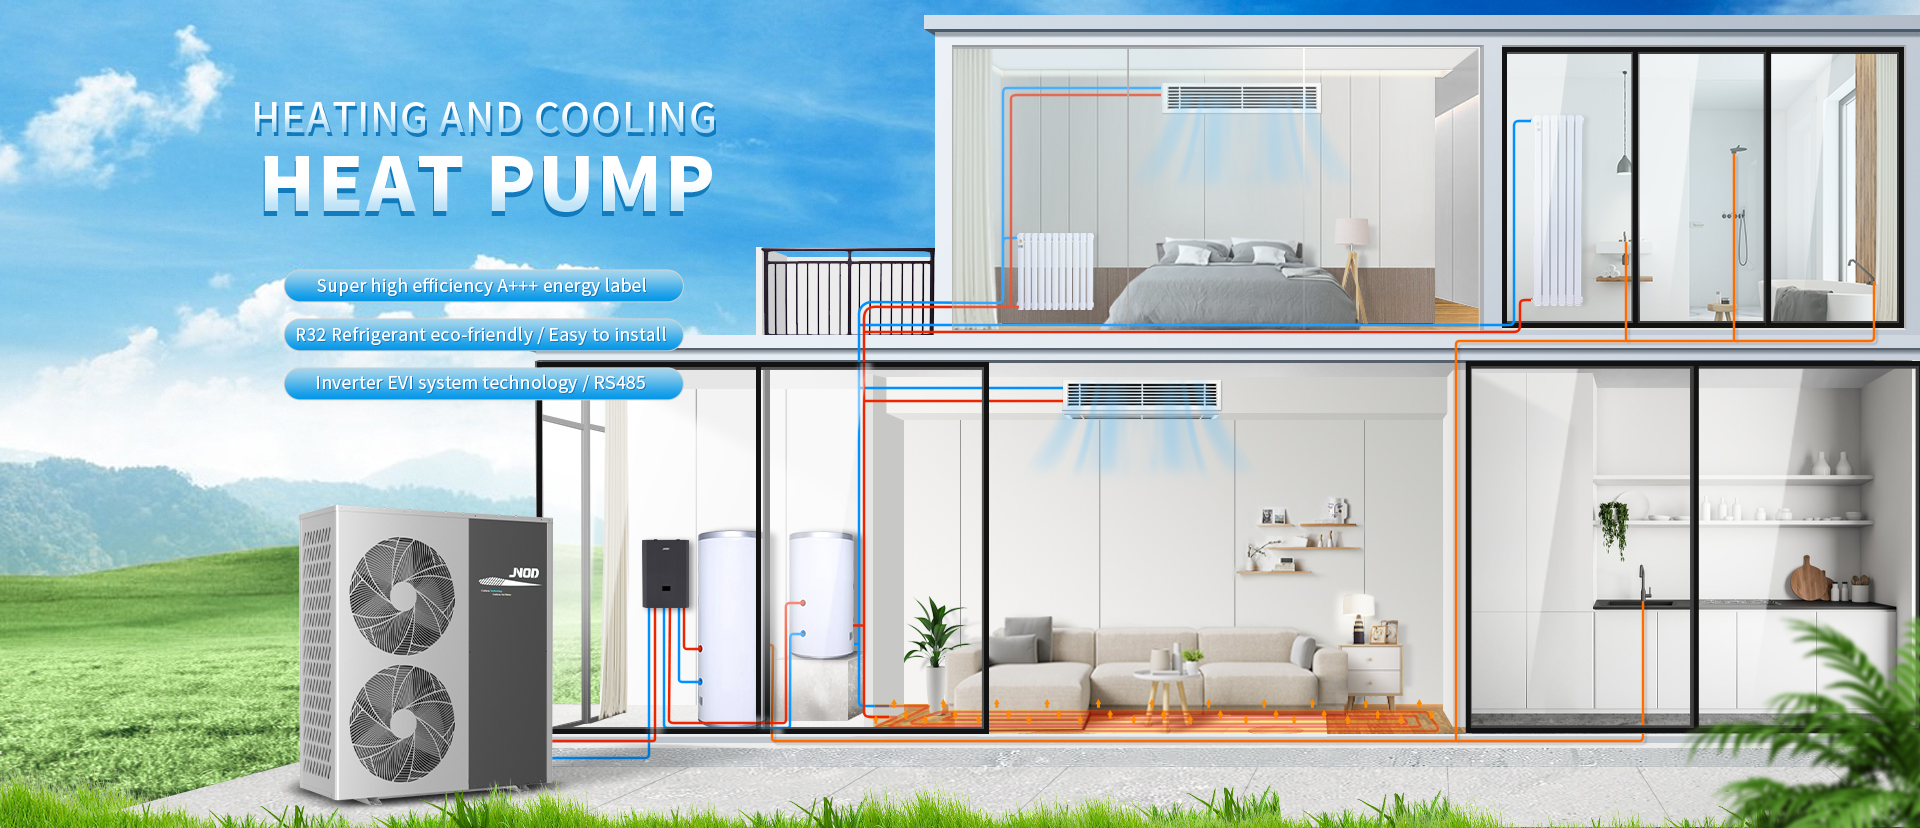 Monoblock Electric Heating And Cooling Heat Pump